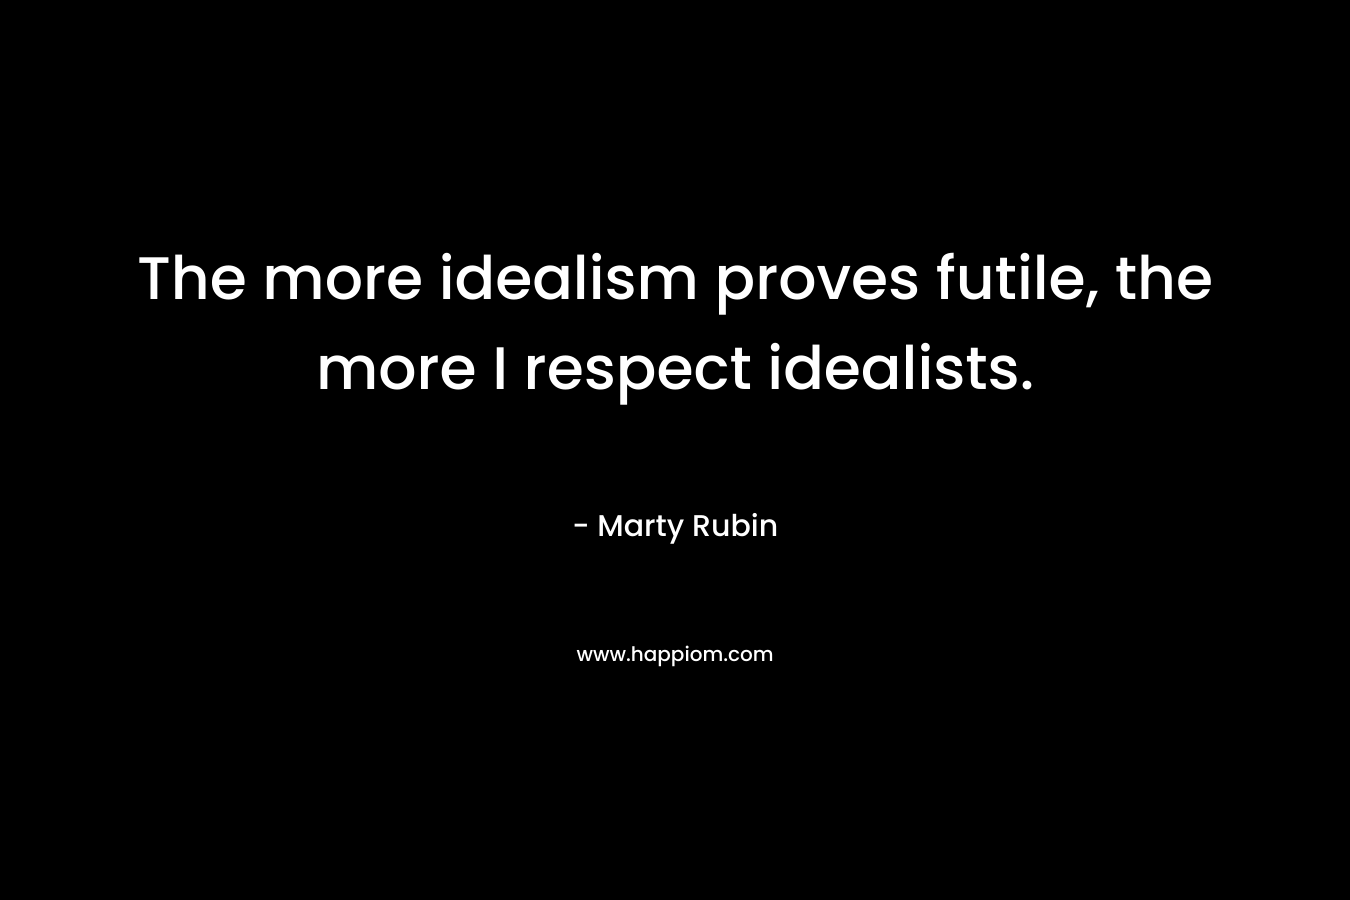 The more idealism proves futile, the more I respect idealists.